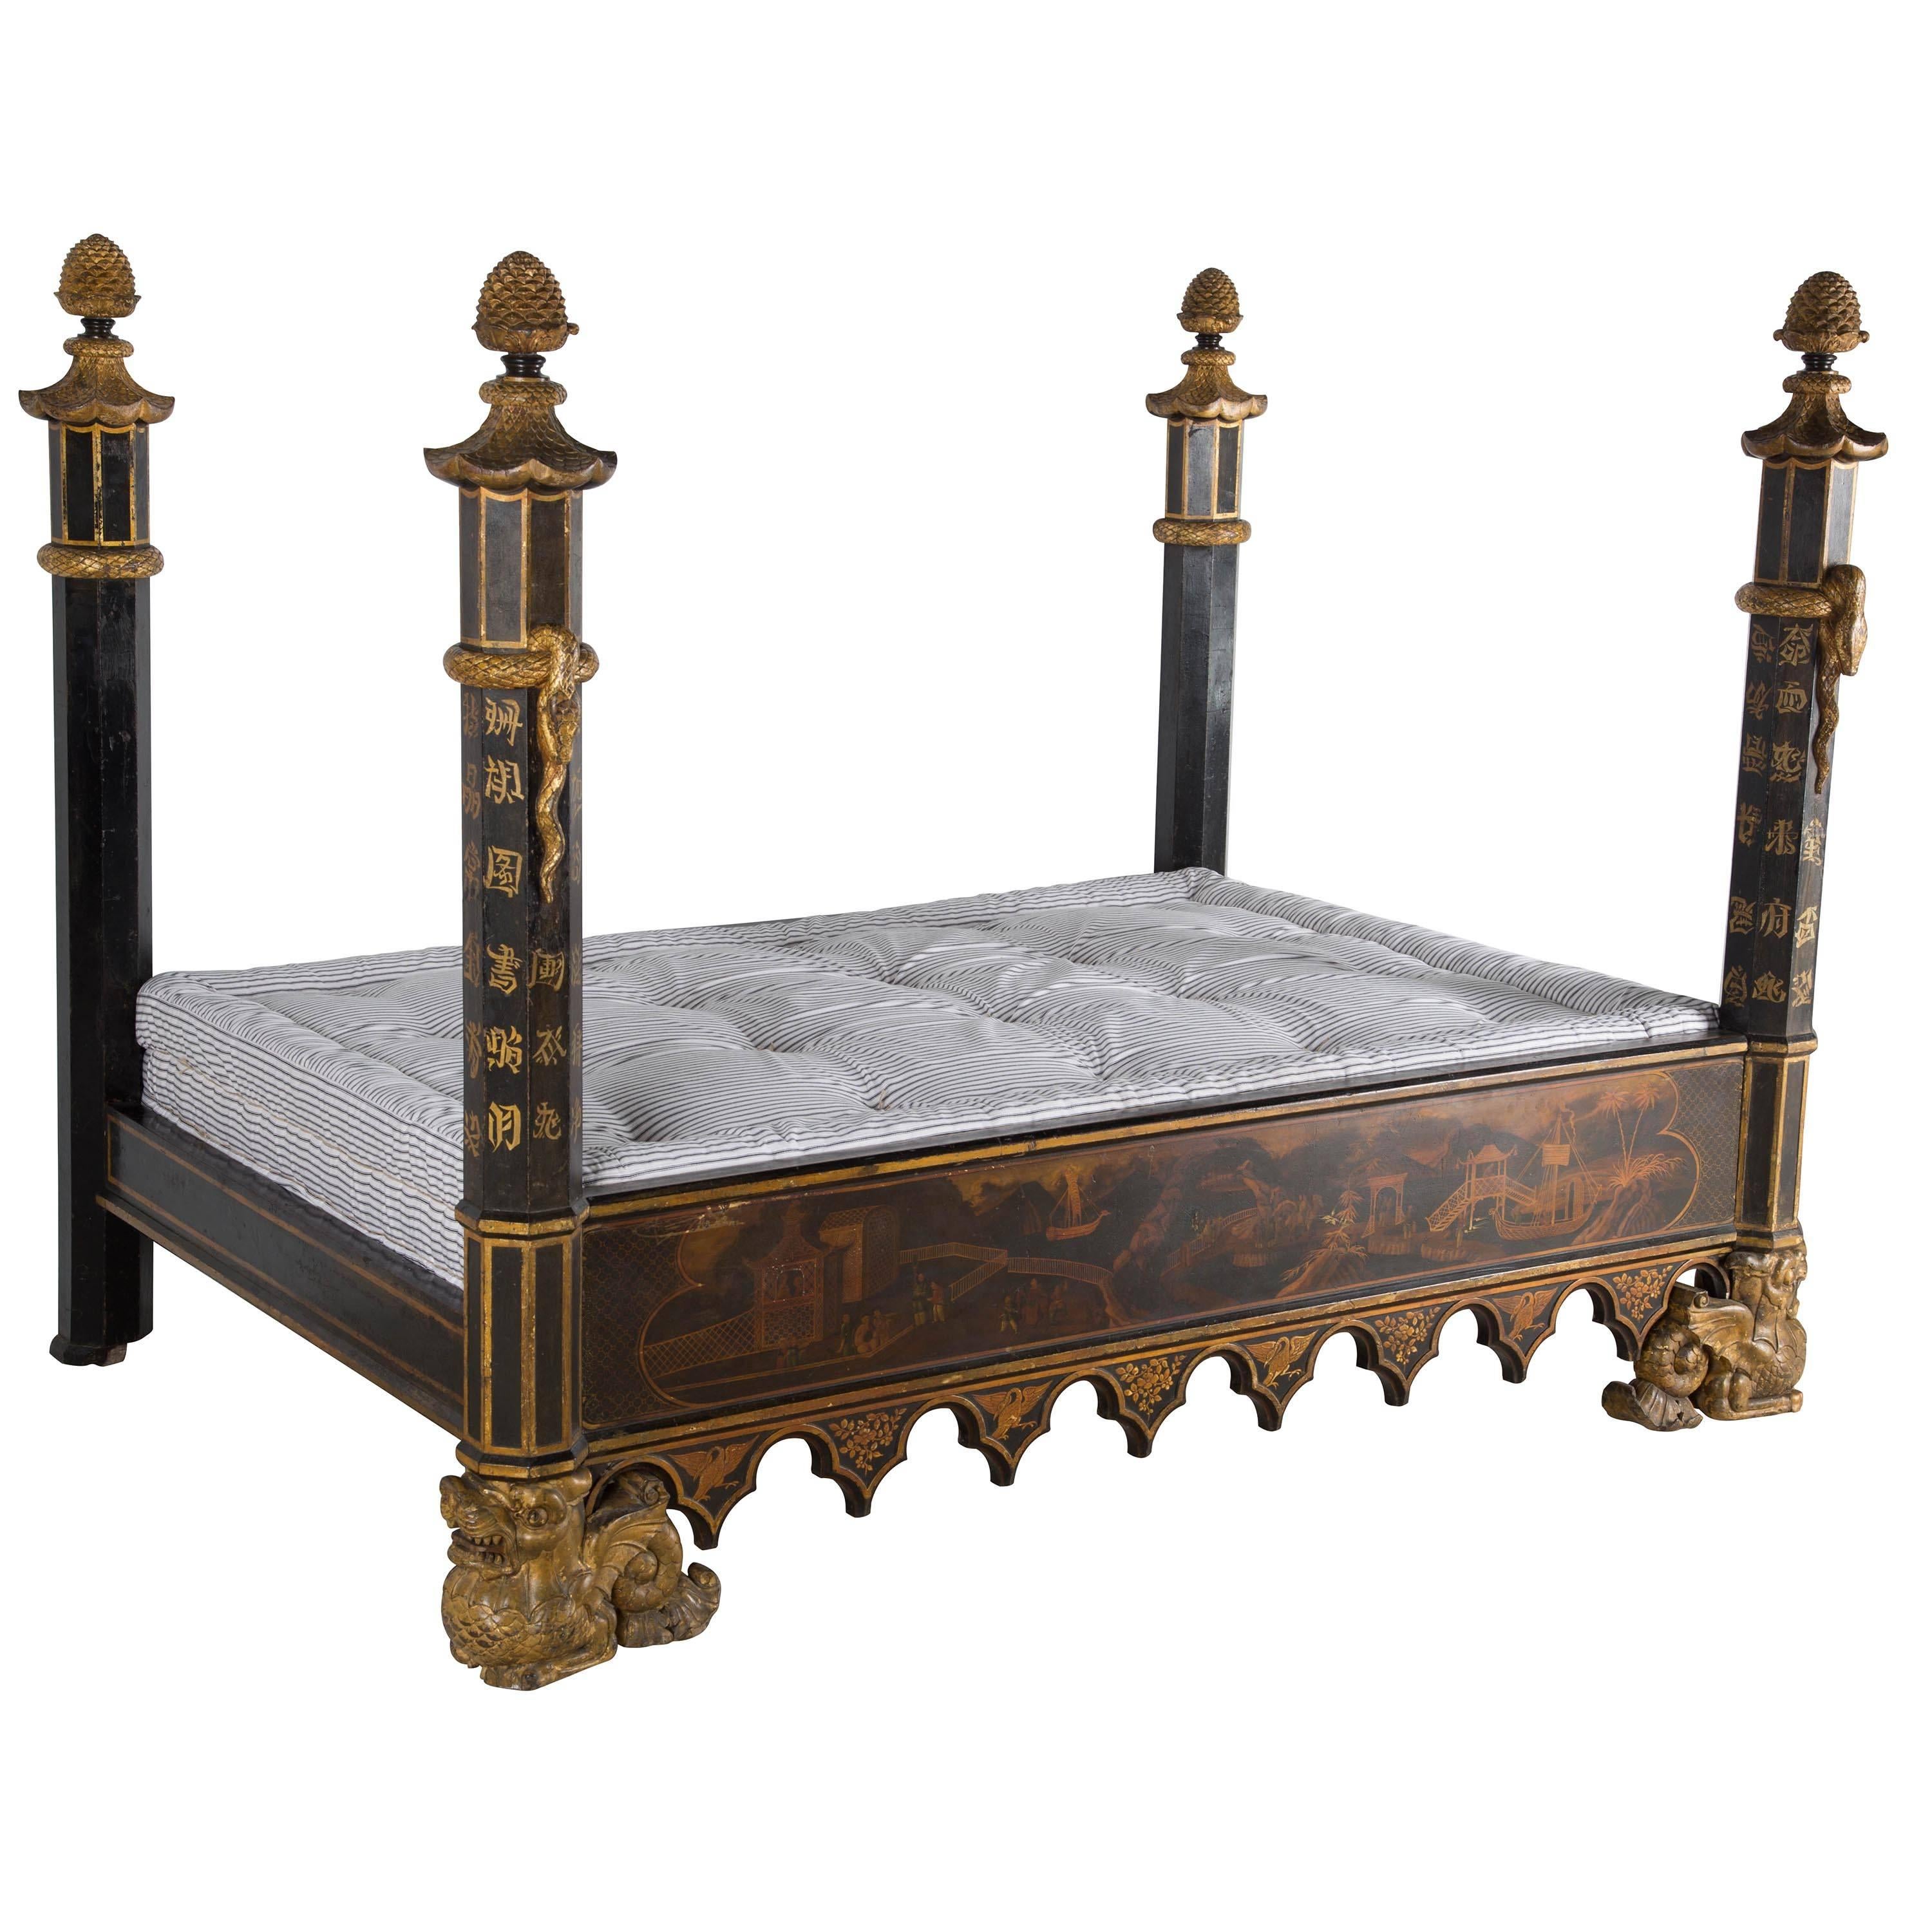 Regency four-poster bed chinoiserie daybed. Painted and lacquered mahogany, gilded wood carvings, English, circa 1805.